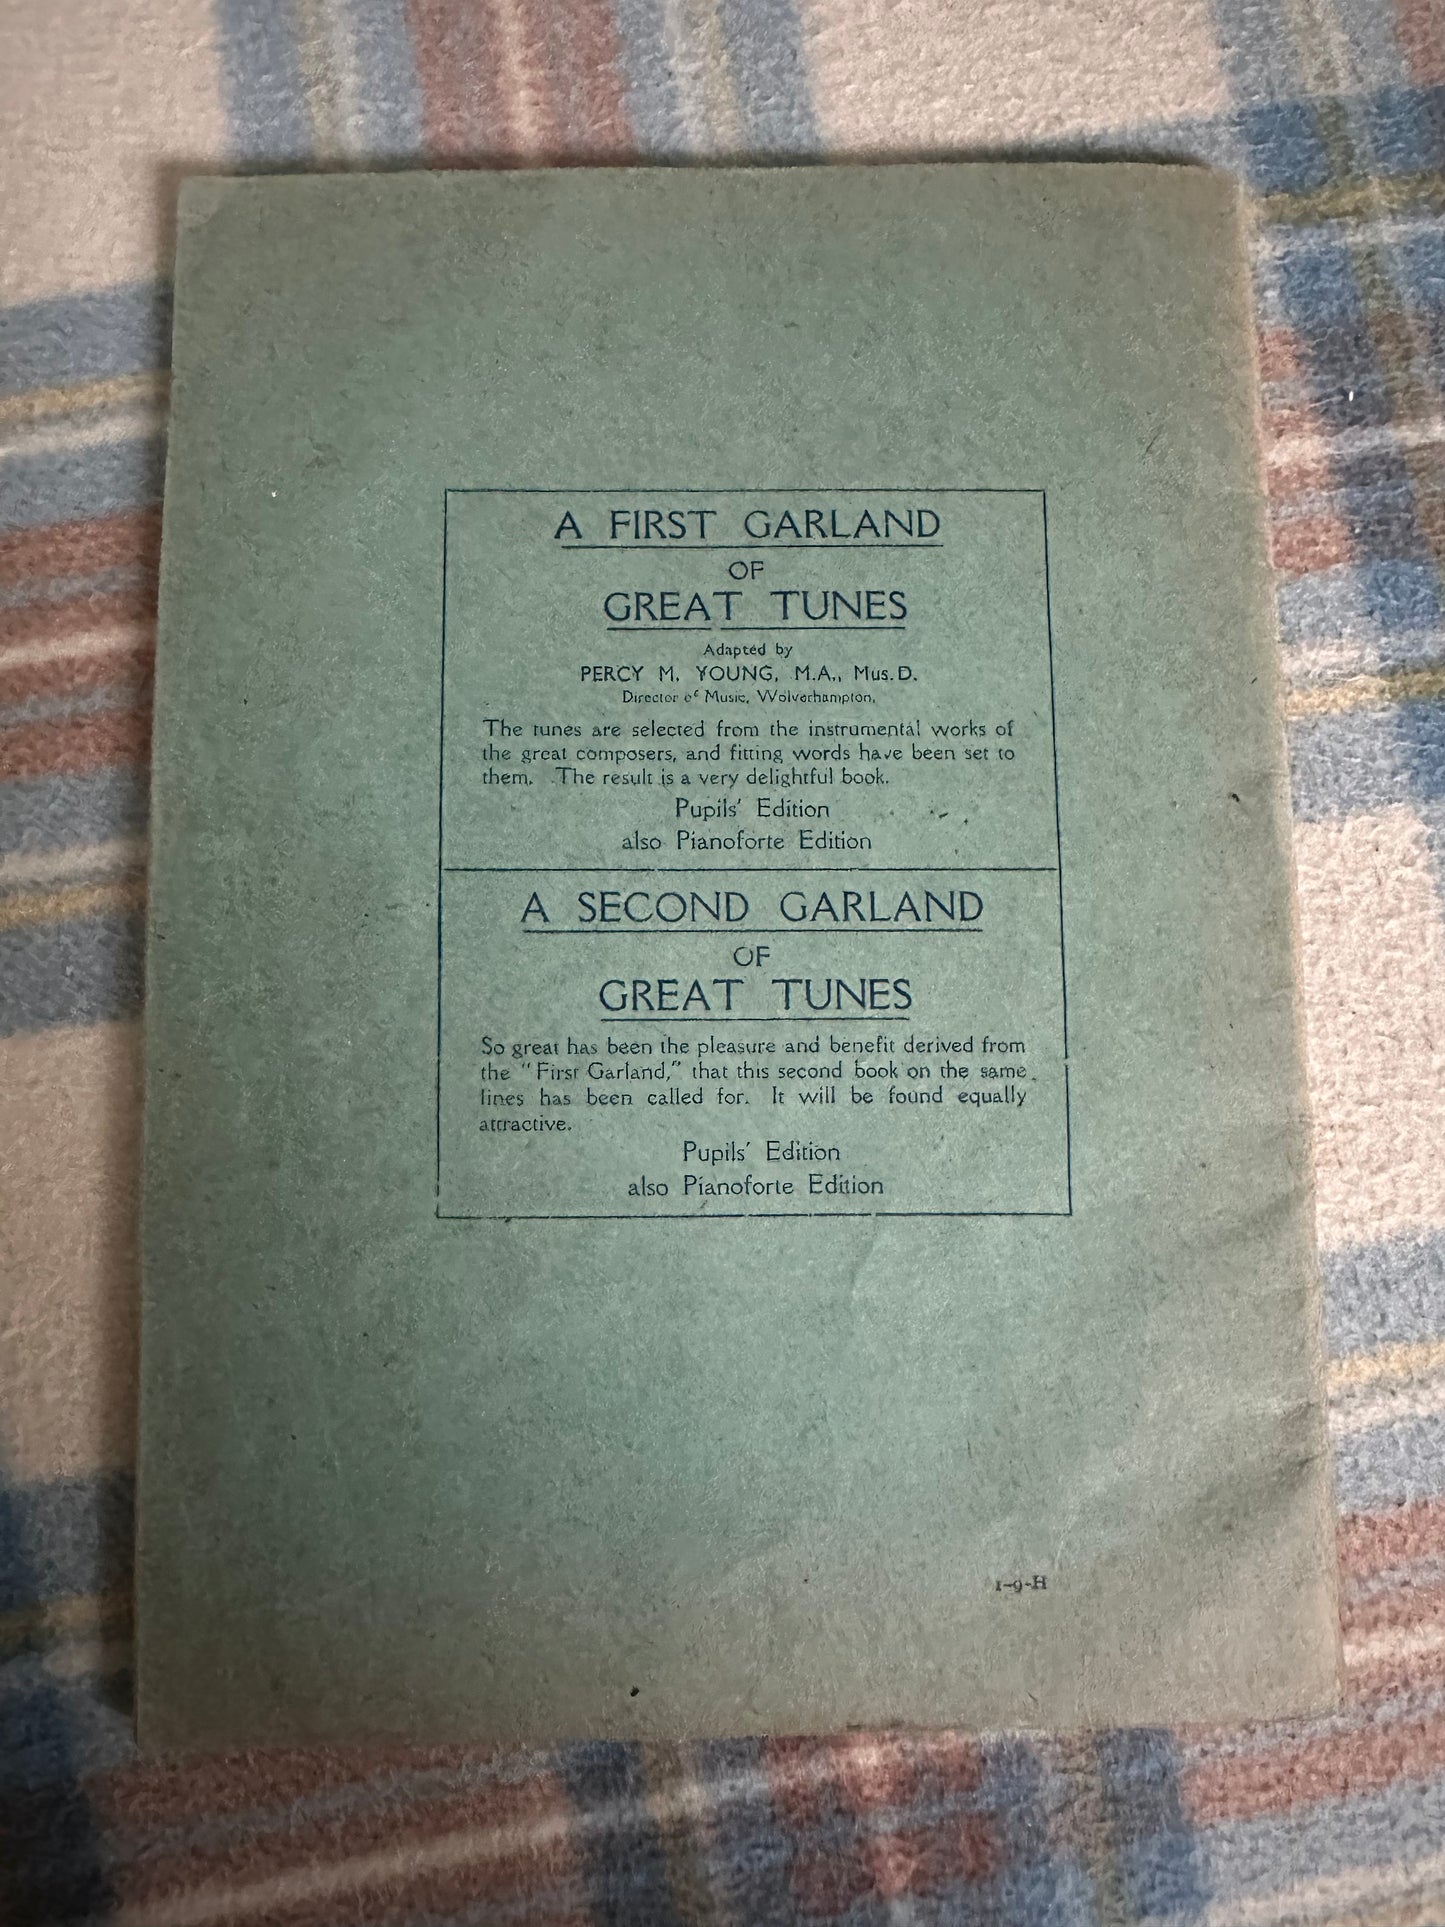 1920’s A First Garland Of Great Tunes - Percy M. Young(McDougall’s Educational Co Ltd)